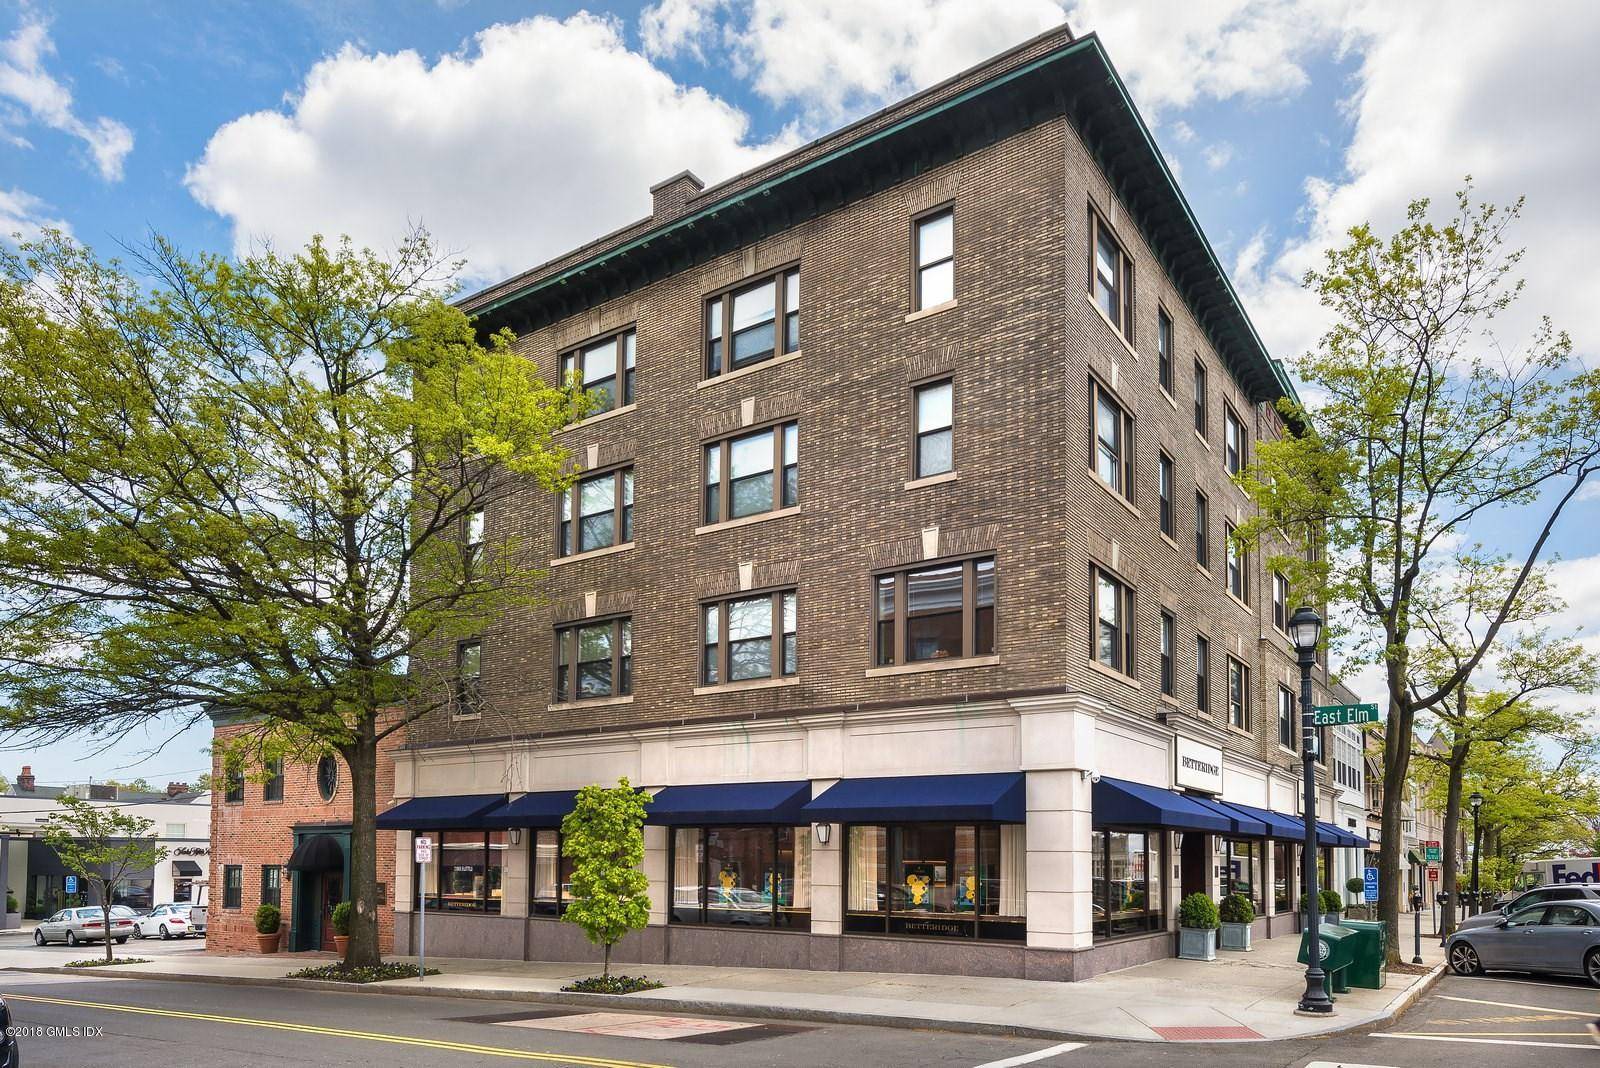 TWO EAST ELM PREMIERE LUXURY BOUTIQUE STYLE RENTAL BUILDING ON GREENWICH AVENUE IN THE HEART OF DOWNTOWN GREENWICH.